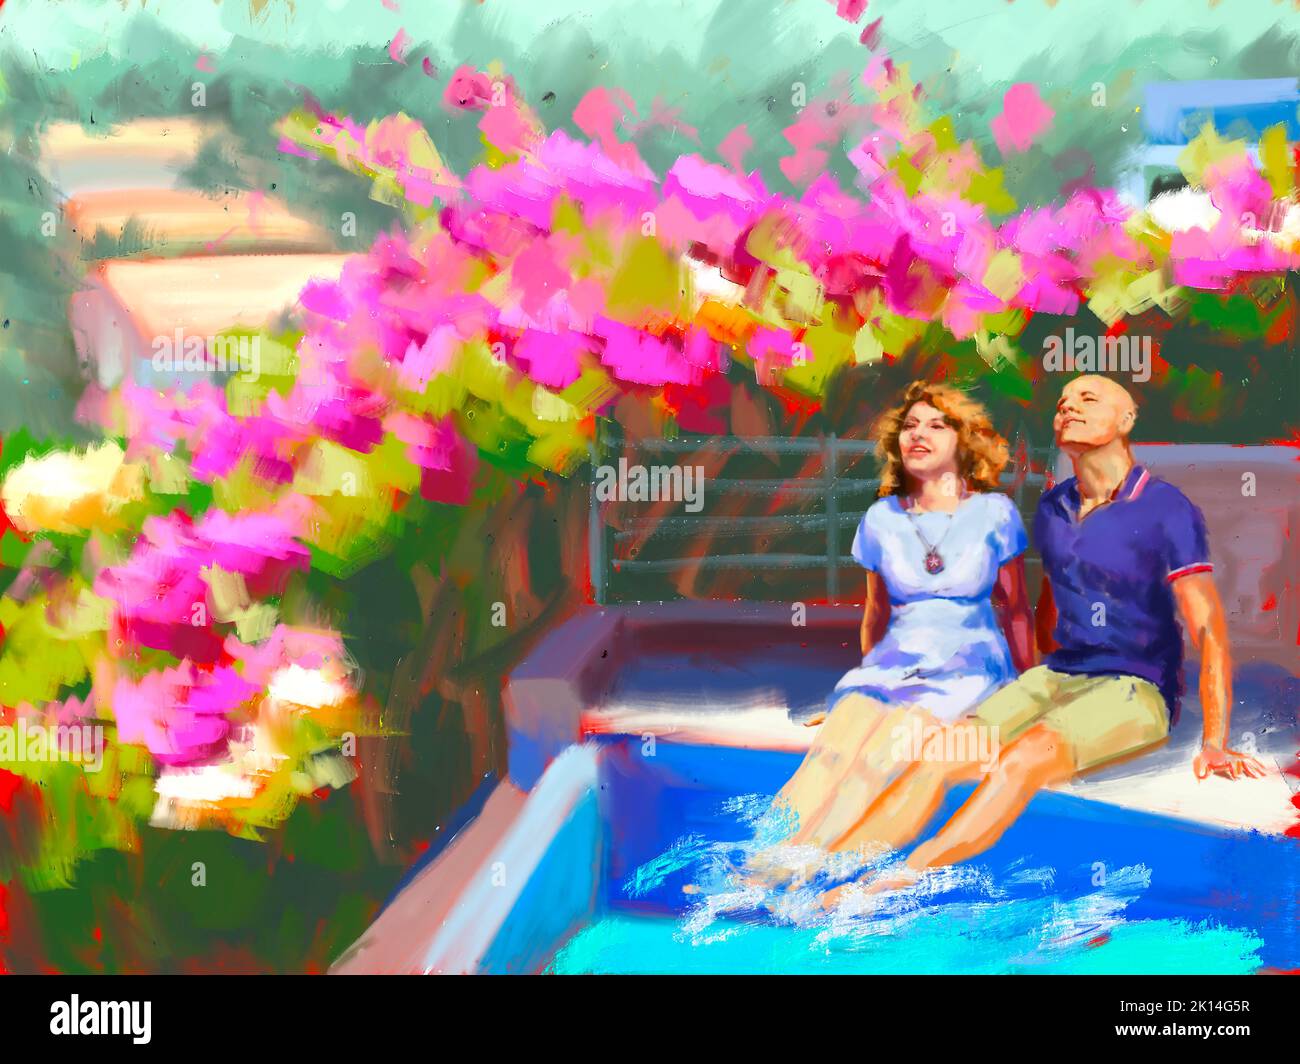 Young couple together in honeymoon near swimming pool. Oil painting impressionsm art Stock Photo